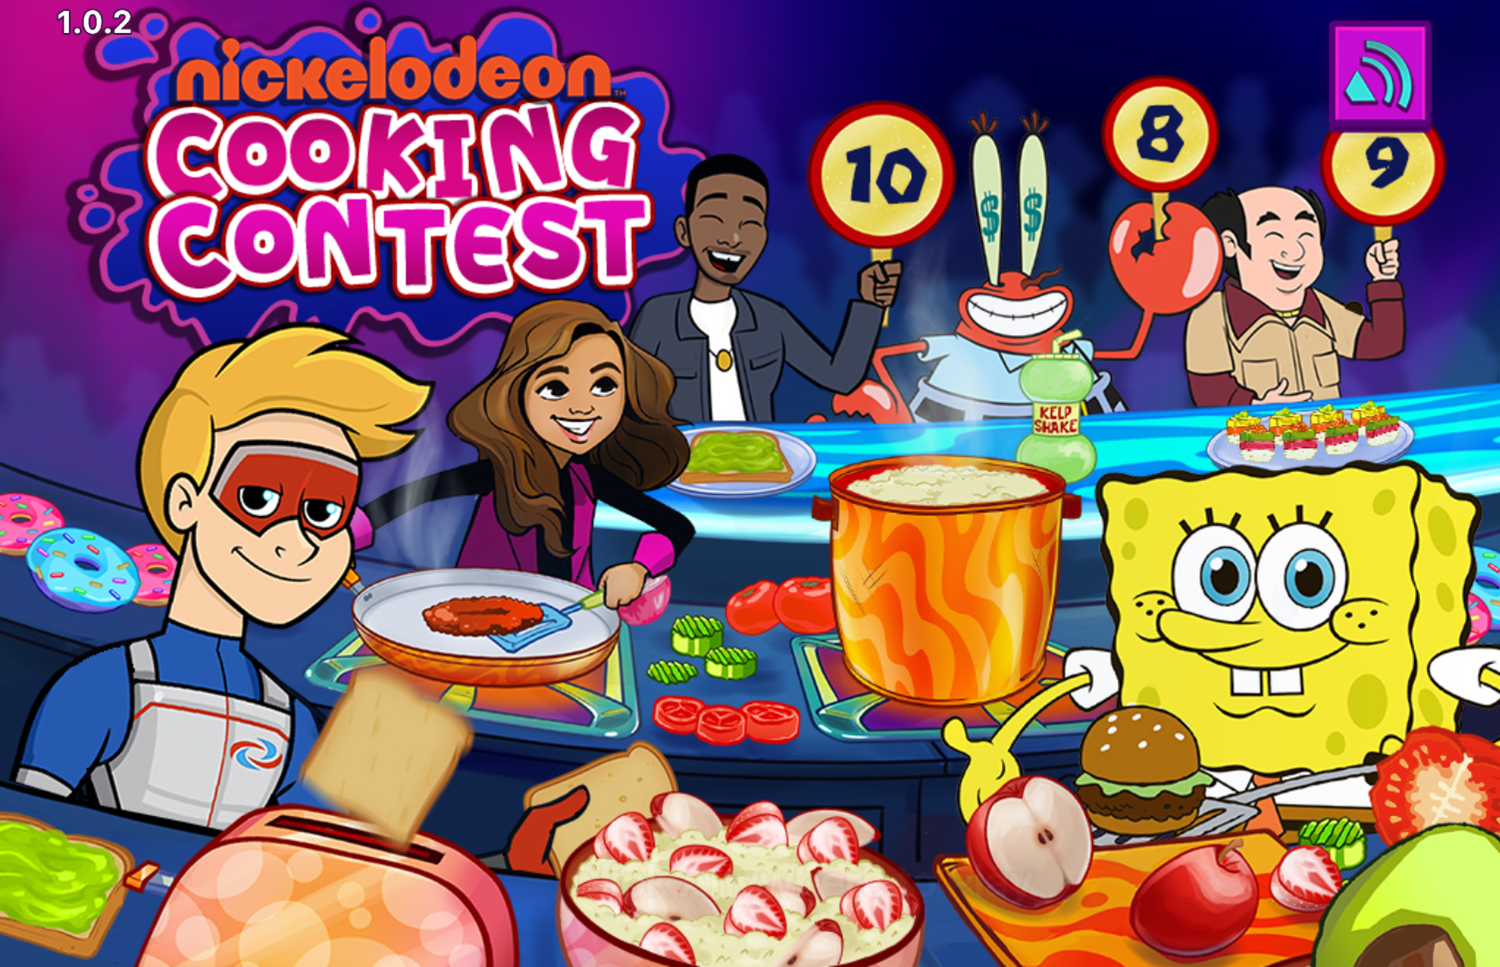 Nick Cooking Contest Game Welcome Screen Screenshot.